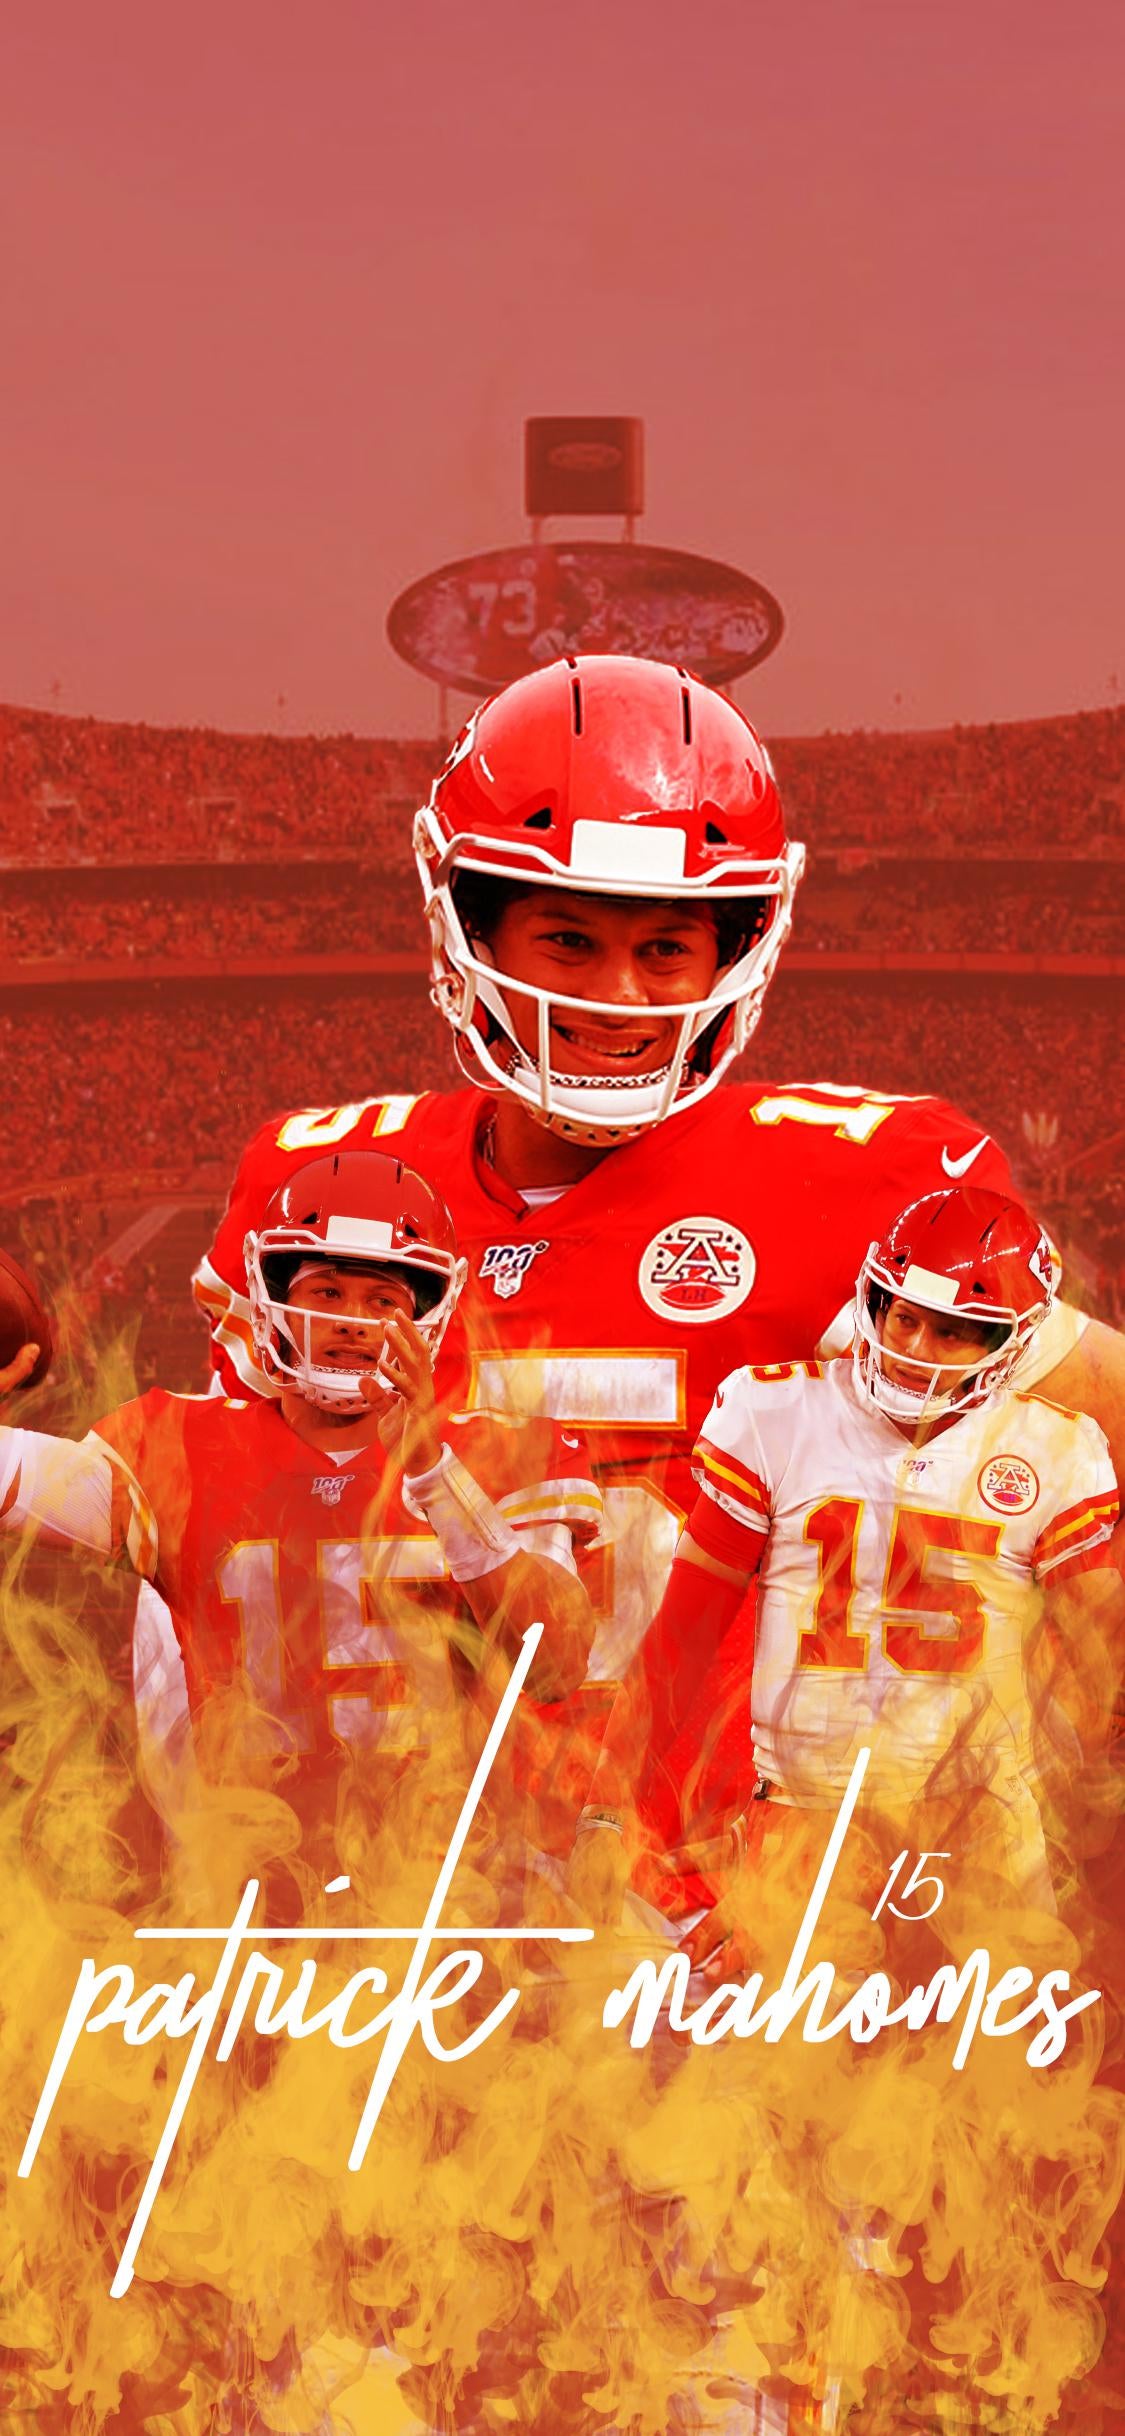 patrick mahomes showing his back with name hd sports Wallpapers  HD  Wallpapers  ID 42307